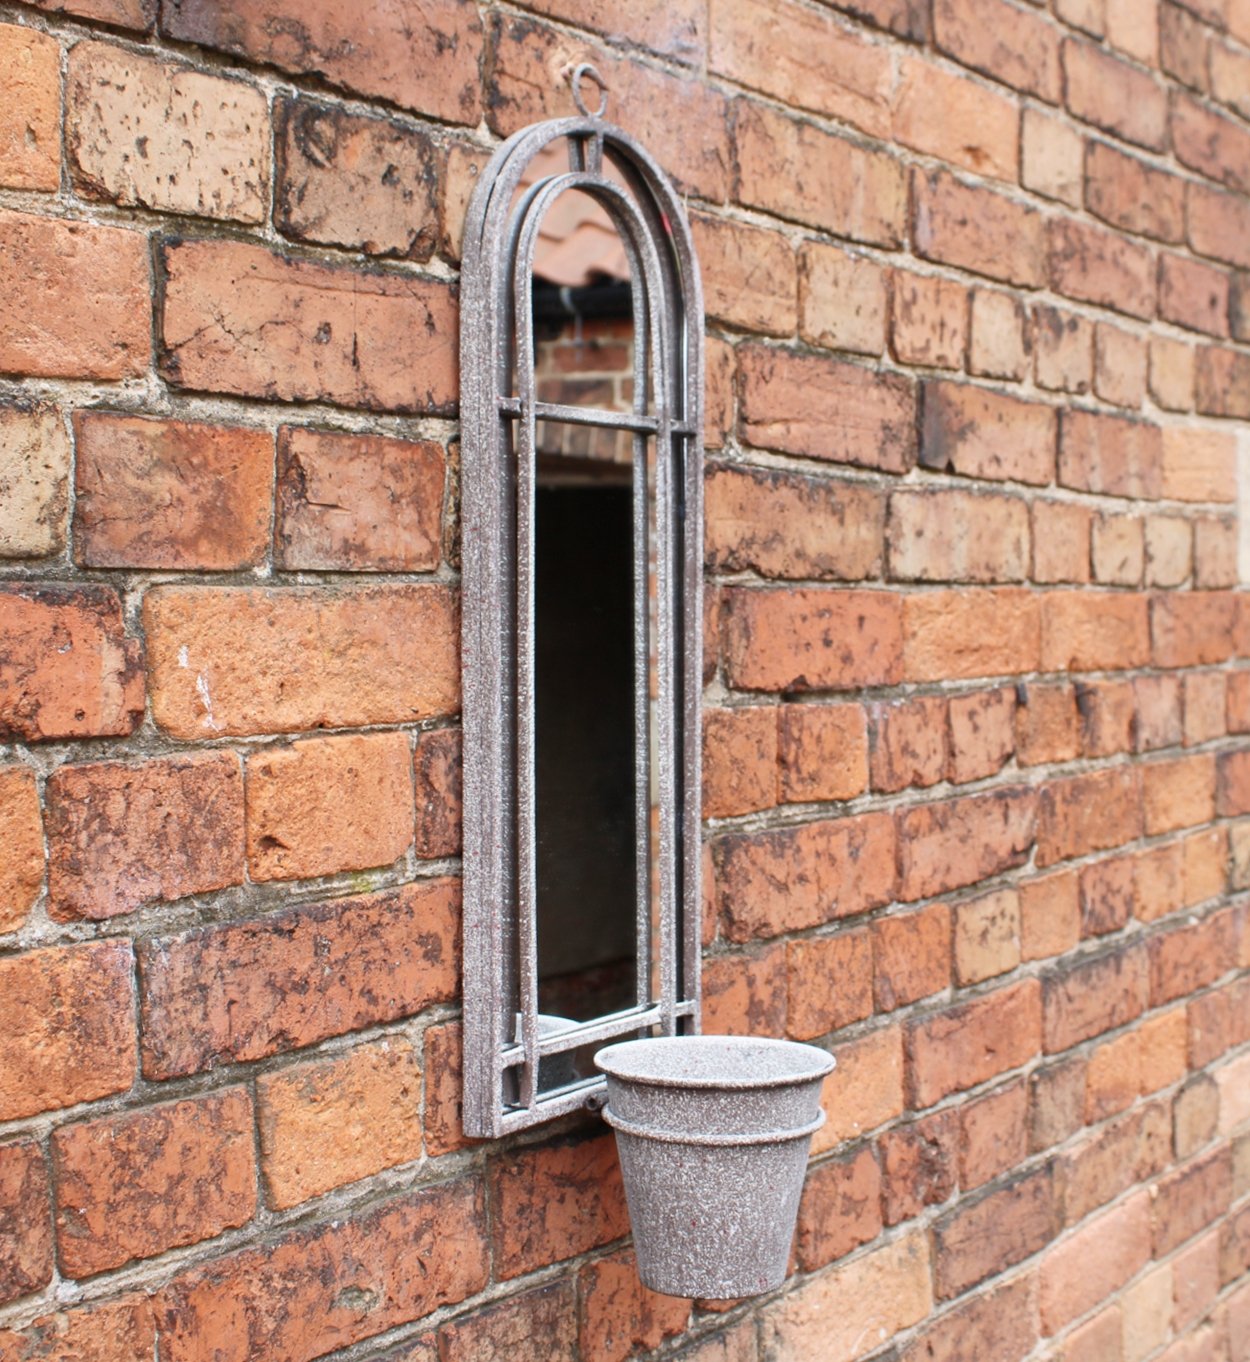 Metal Wall Mirror with Planter - a Cheeky Plant